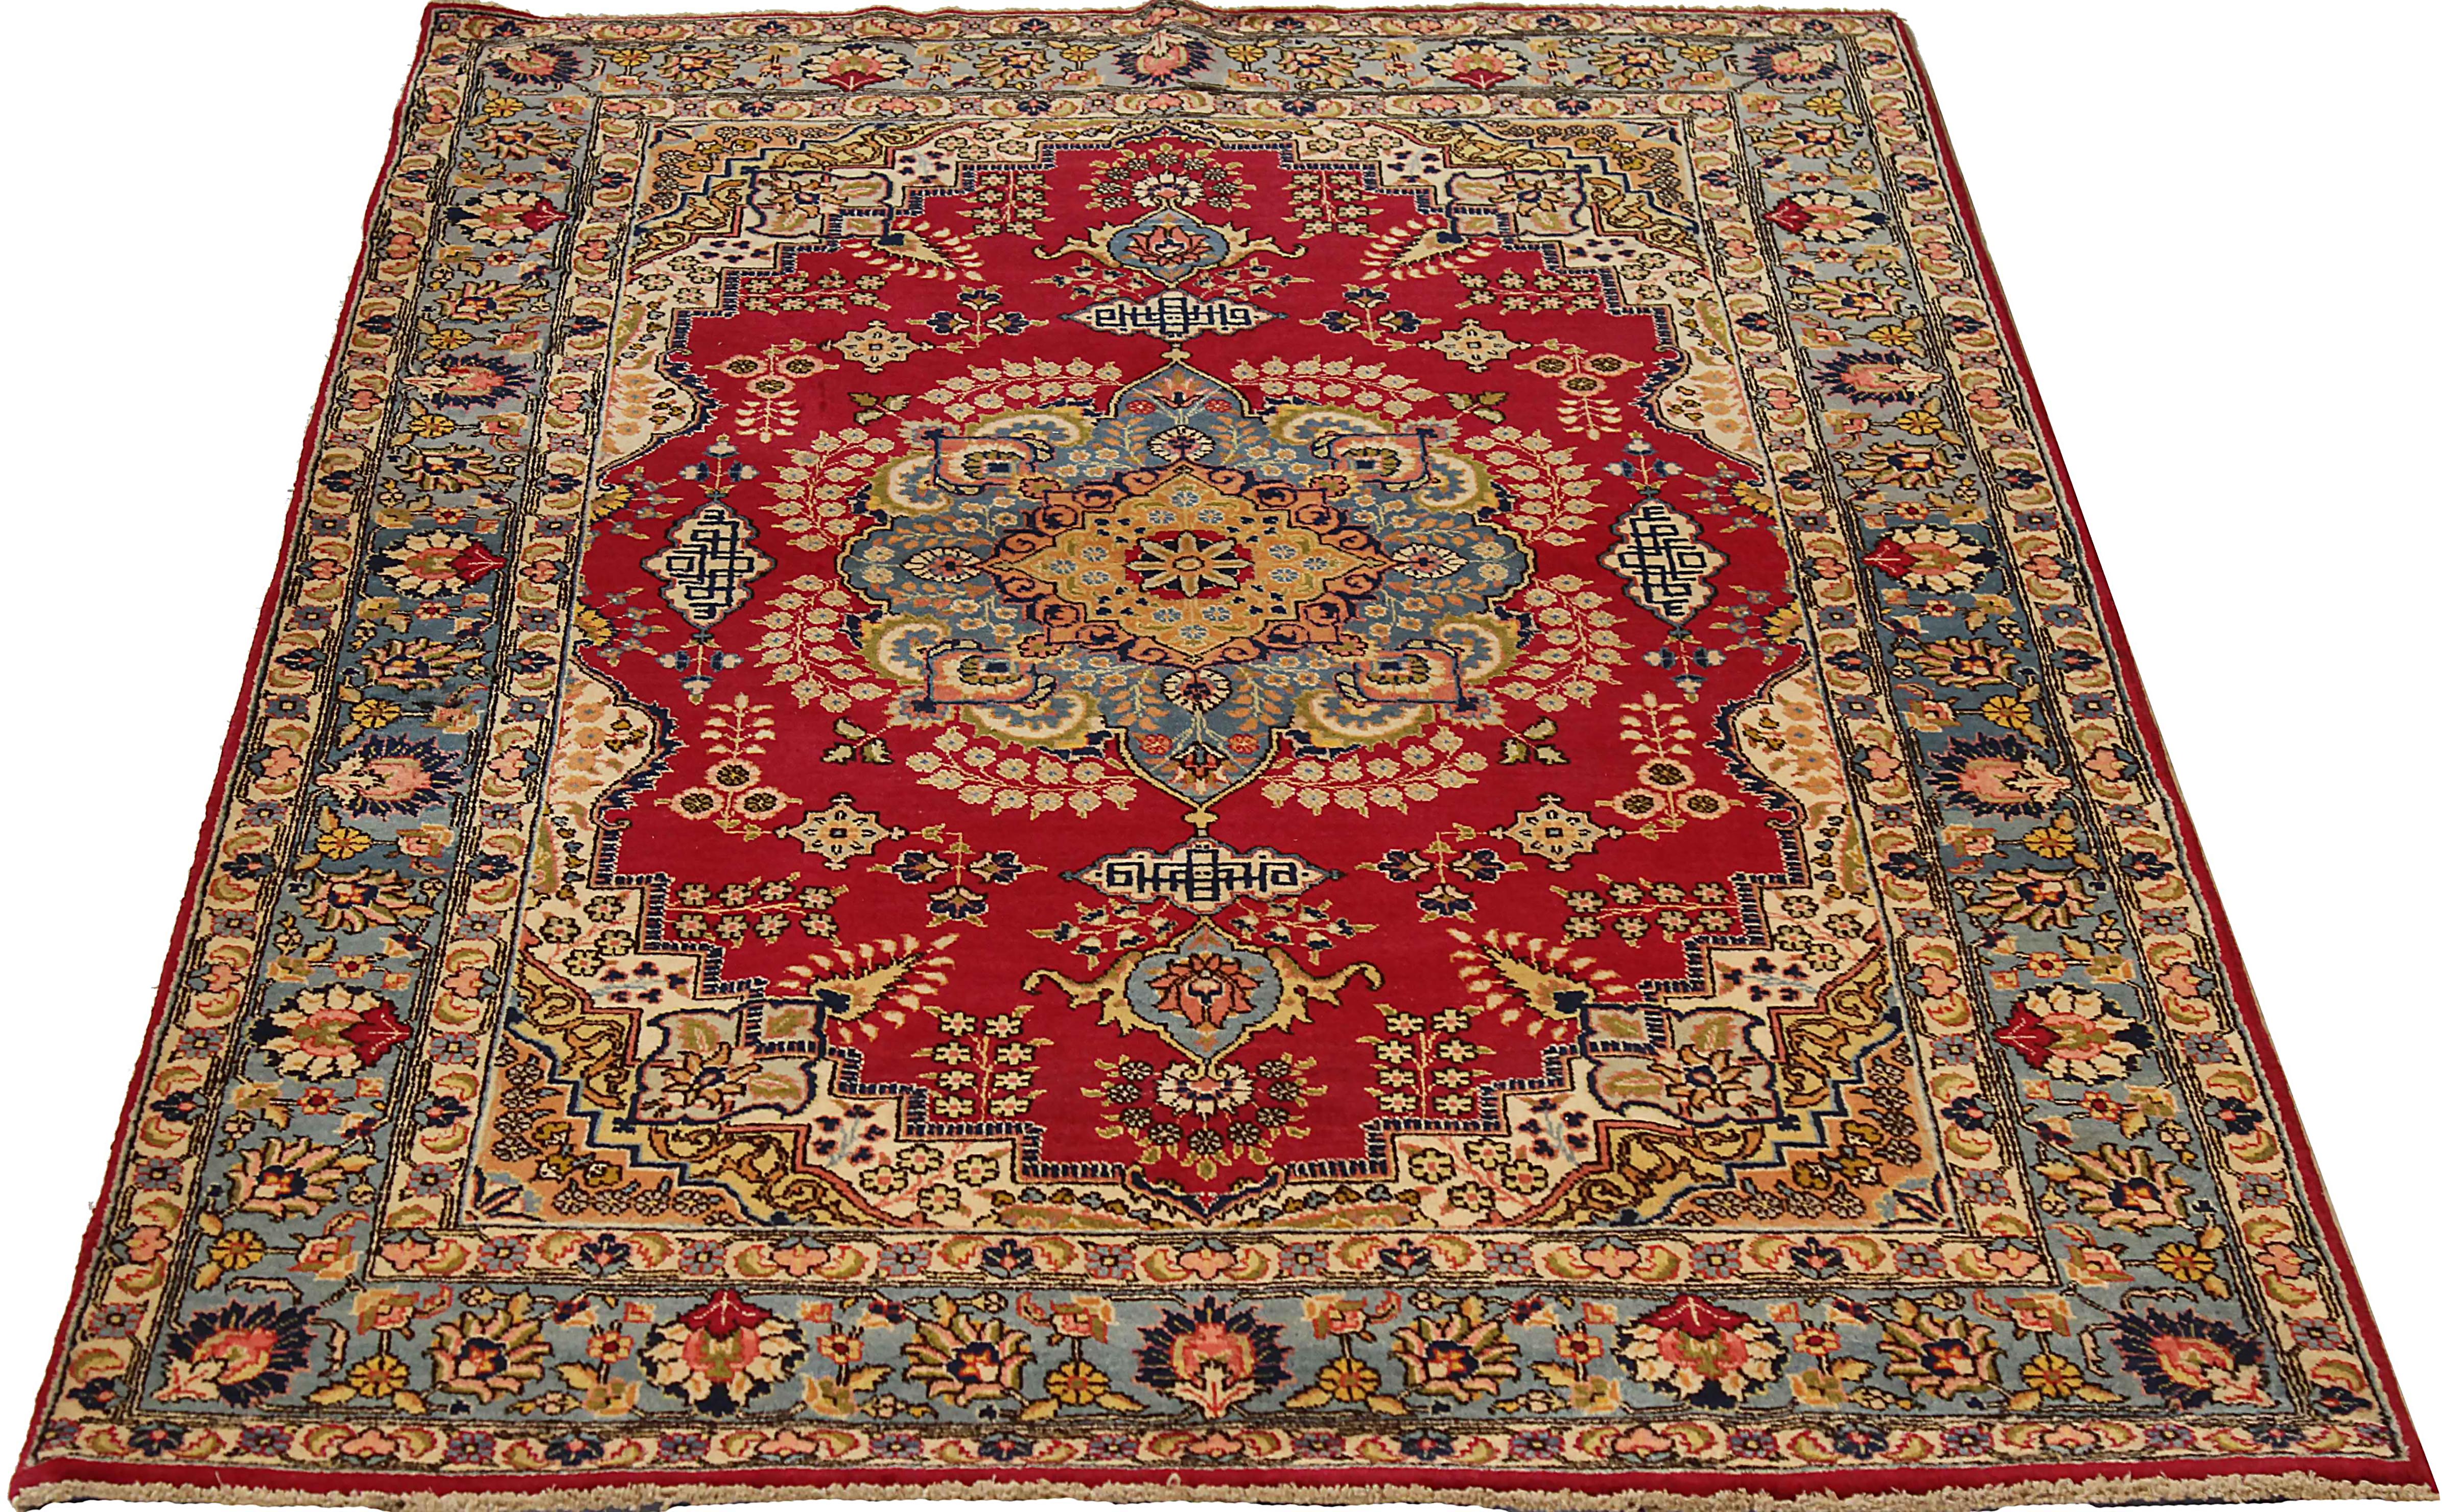 Antique Persian area rug handwoven from the finest sheep’s wool. It’s colored with all-natural vegetable dyes that are safe for humans and pets. It’s a traditional Mashad design handwoven by expert artisans. It’s a lovely area rug that can be